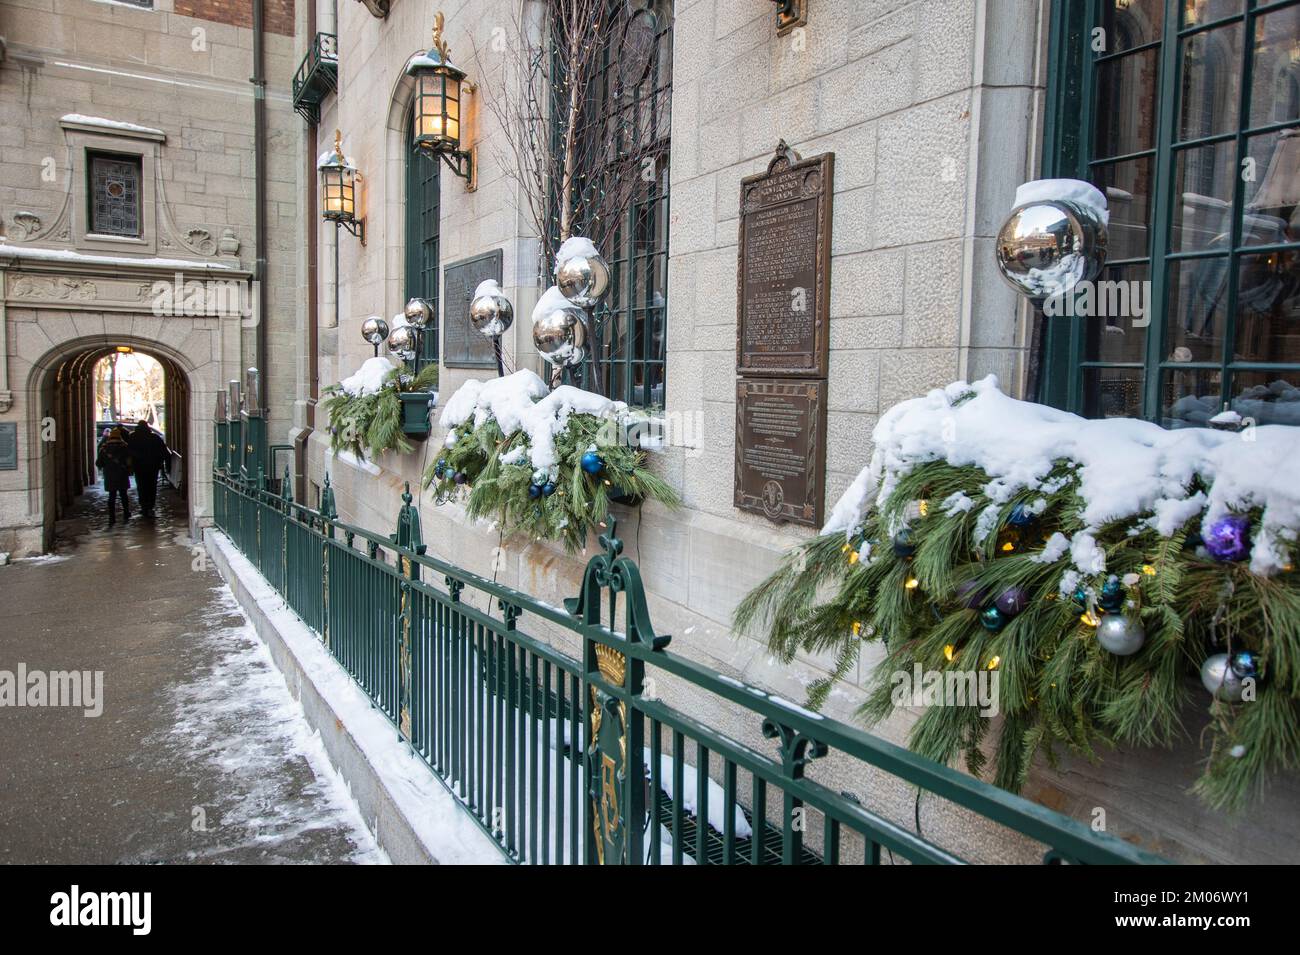 By Fairmont Chateau Frontenac in Quebec City Stock Photo